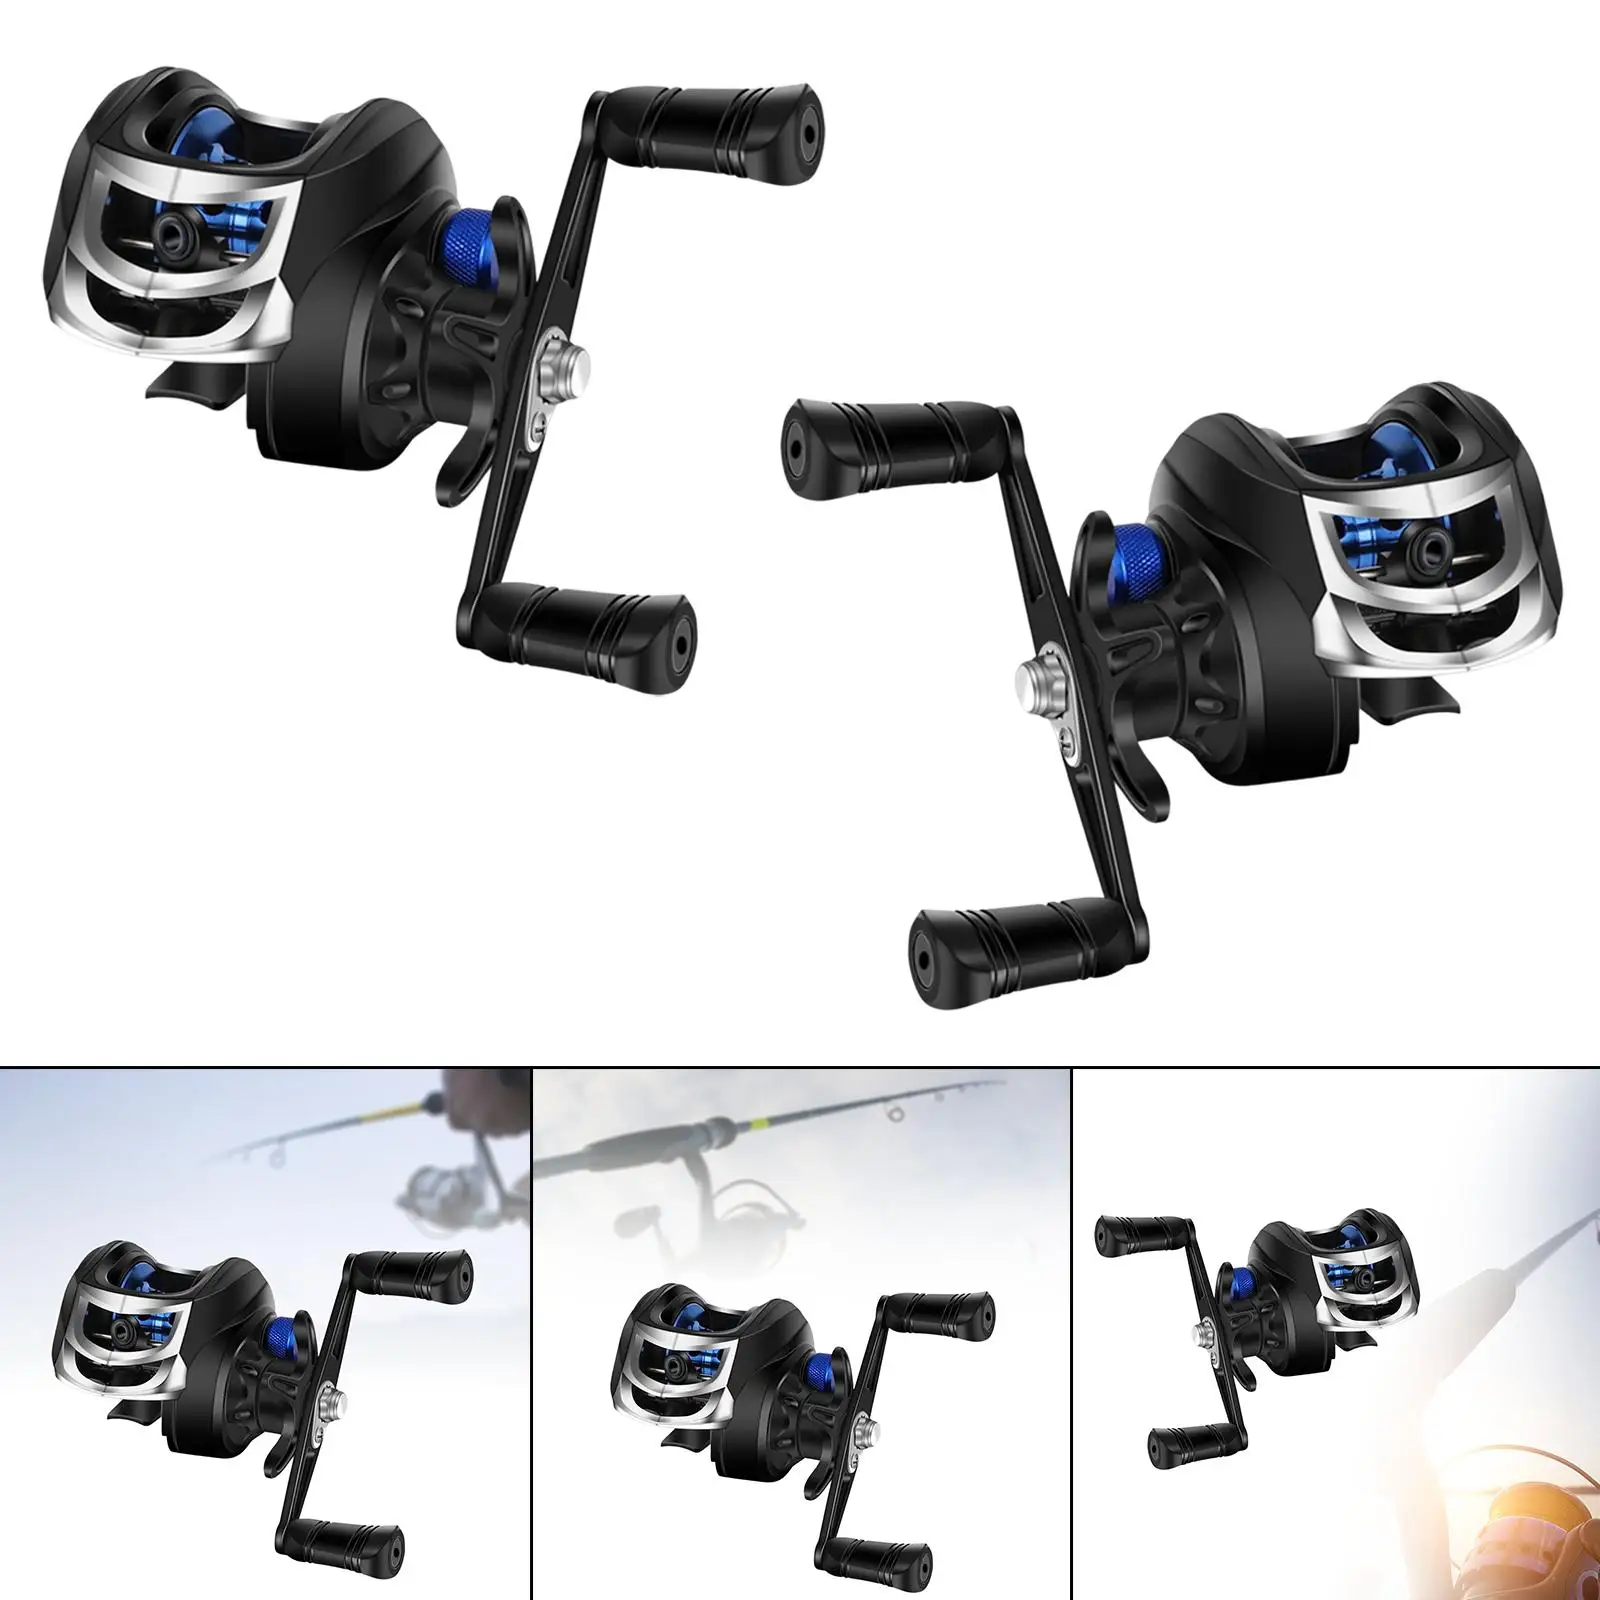 7.2:1 Gear Ratio Baitcasting Reel Sealed Drag System 8kg Max Drag Compact Design 9 Level Magnetic Brake for Fishing Supplies